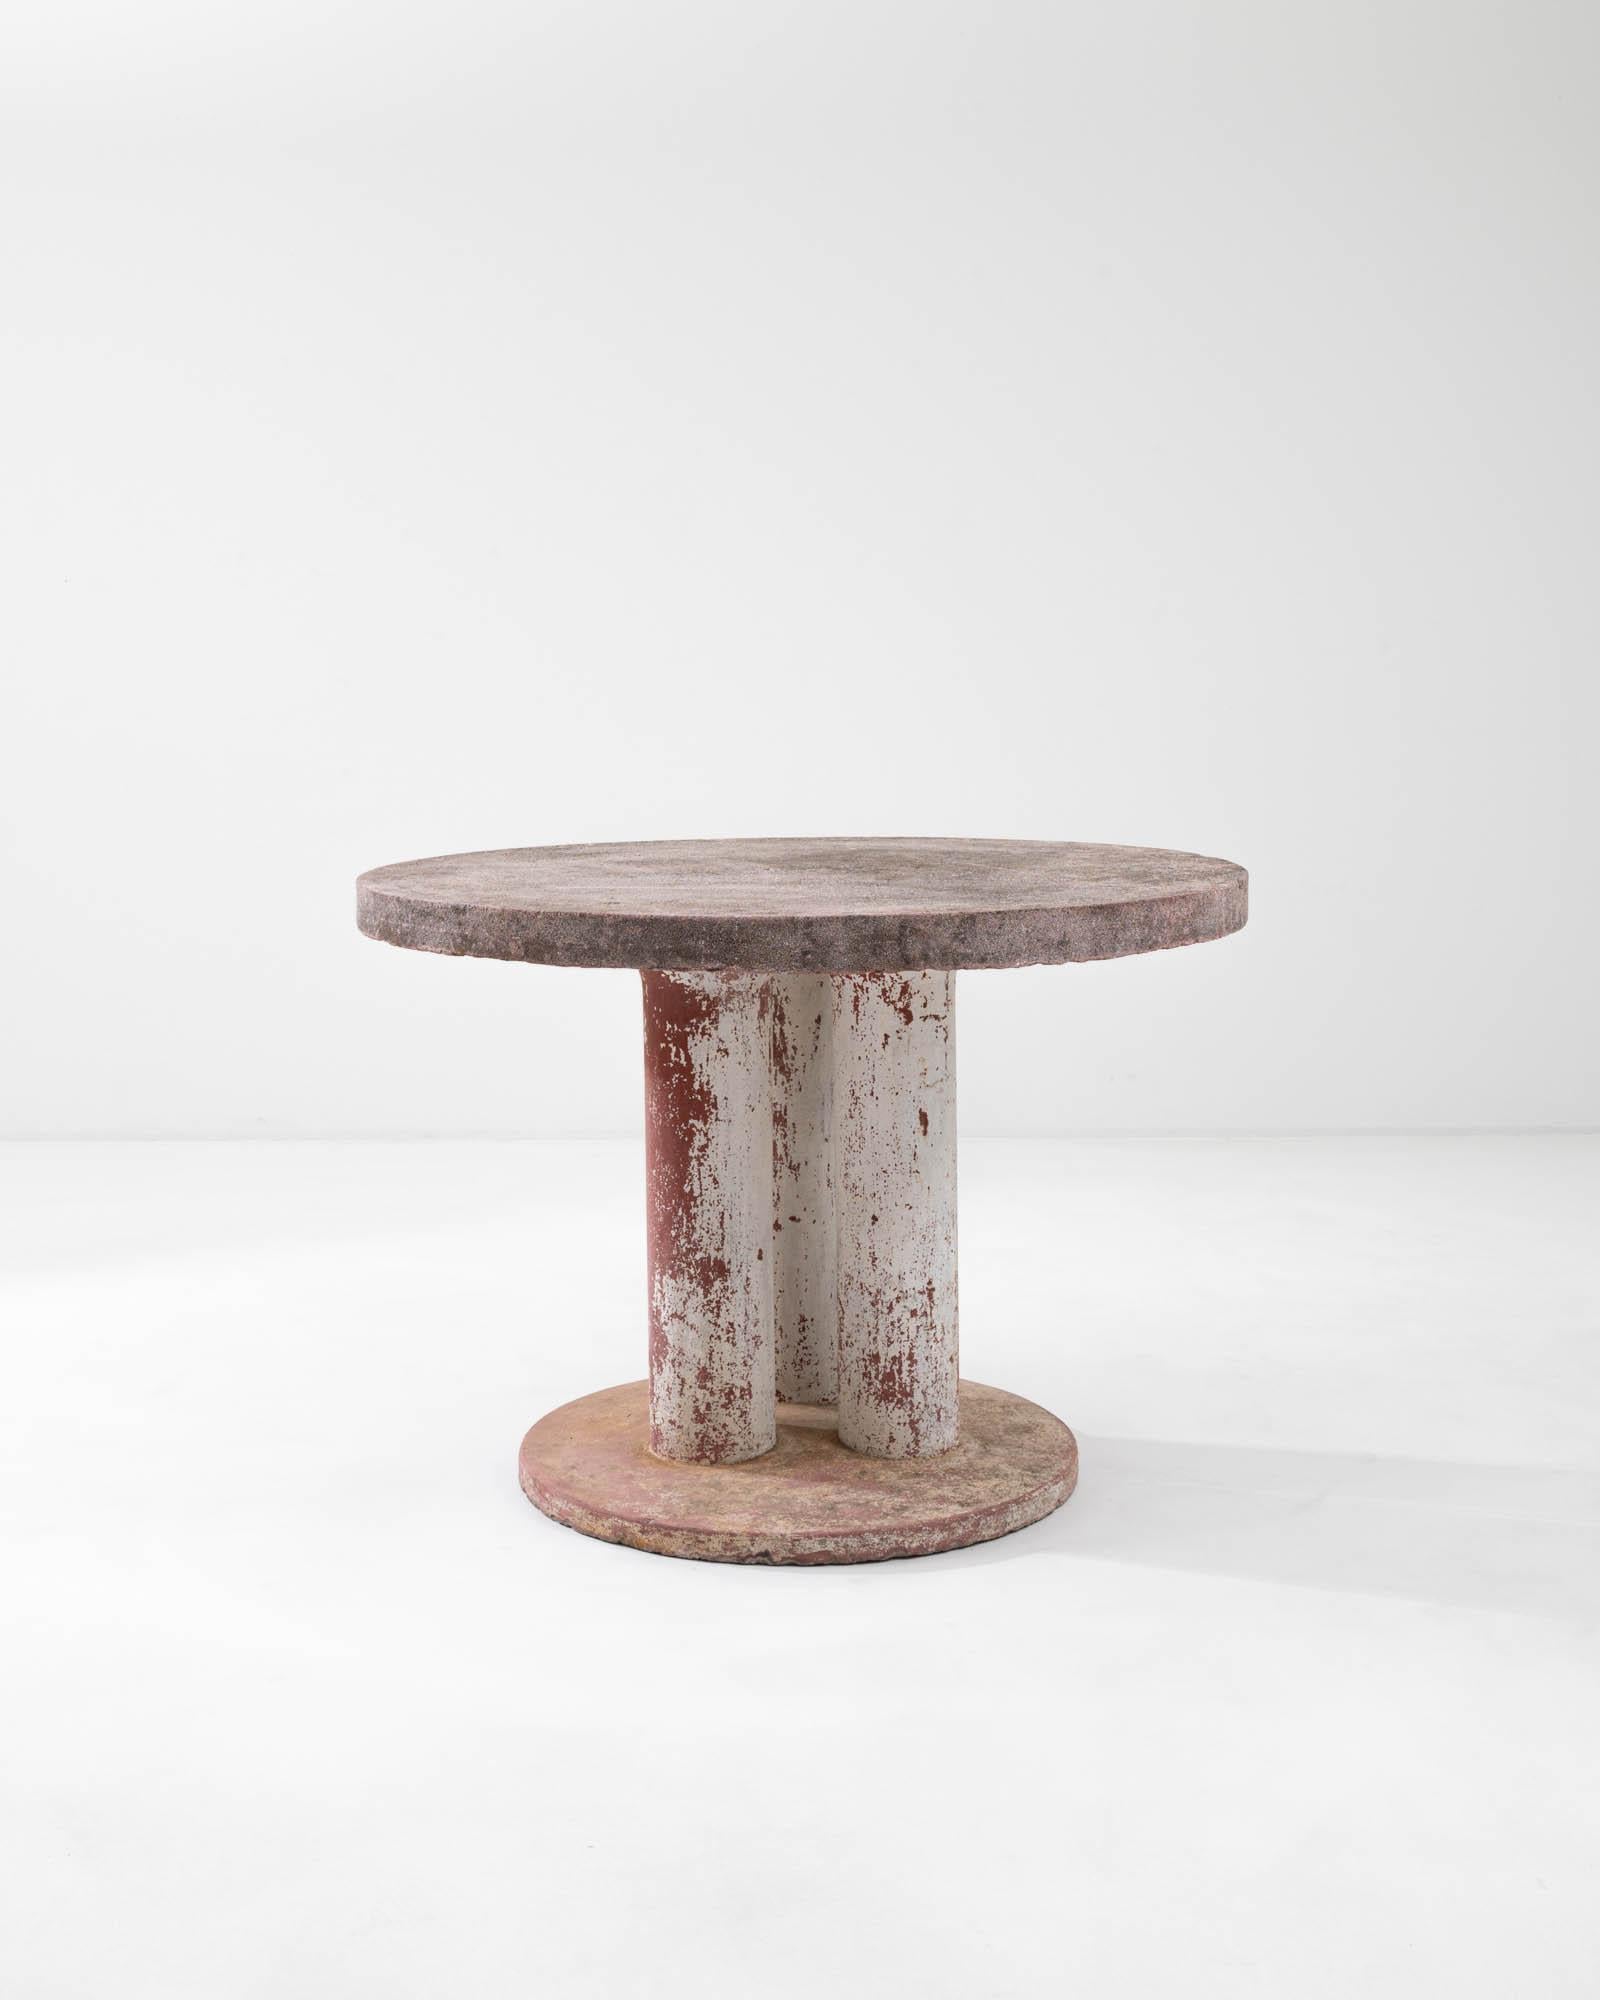 A concrete table created in 20th century France. Solid, sturdy, this monolithic furniture communicates a resilient withstanding of time. A minimal construction, three conjoined legs rise up from a smaller circular base to support a larger and